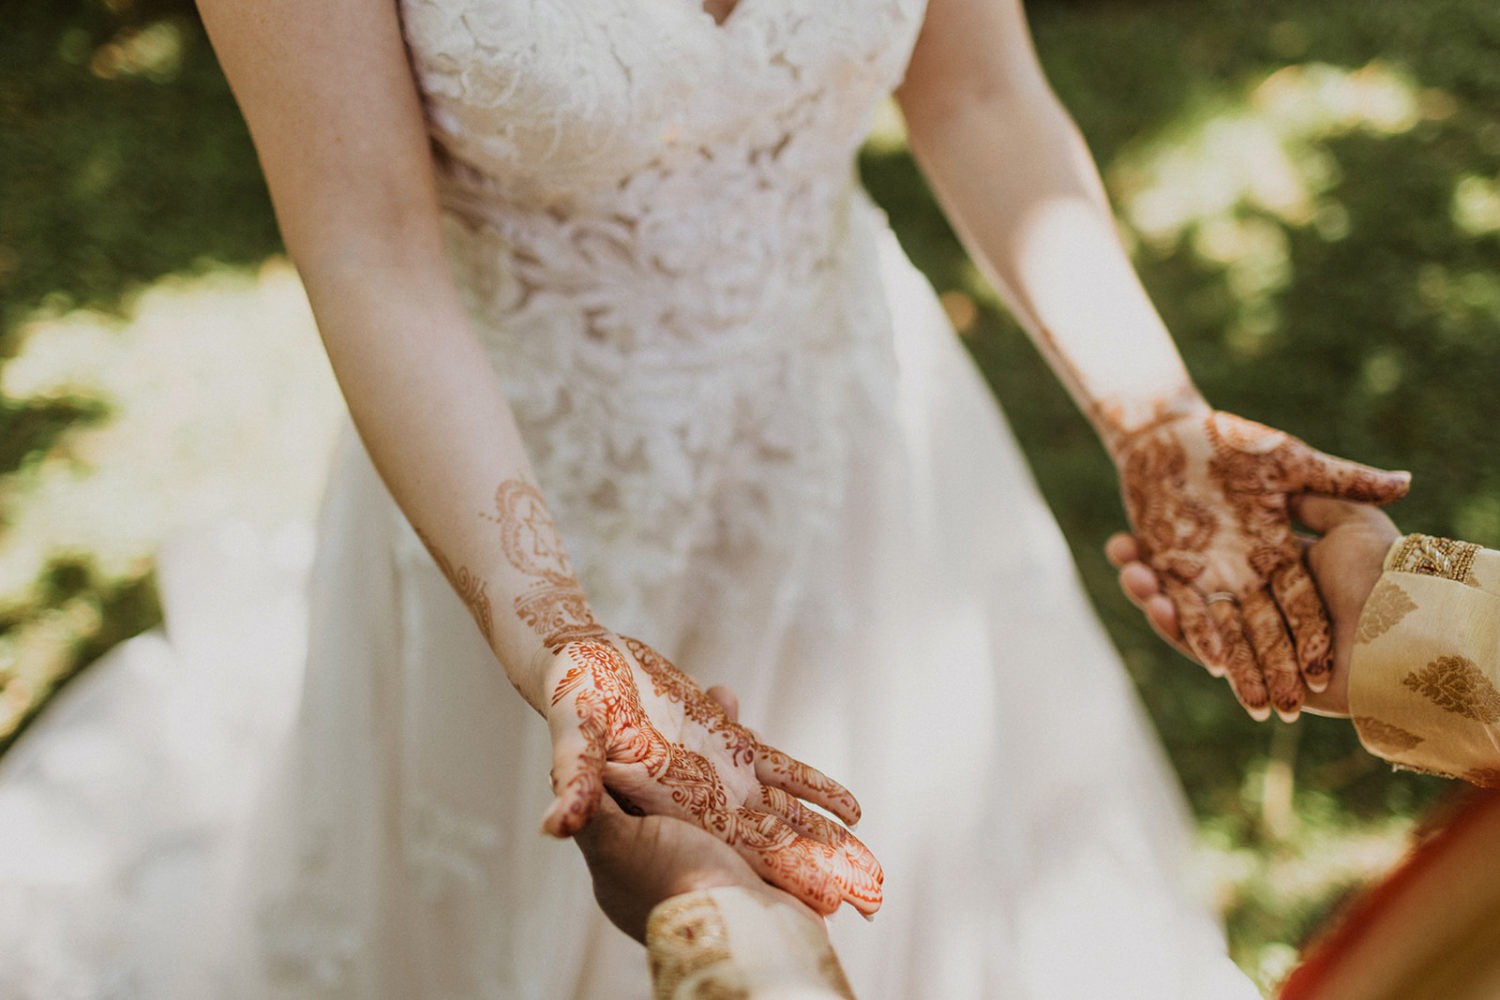 couple stands holding hands with henna on bride's arms and hands